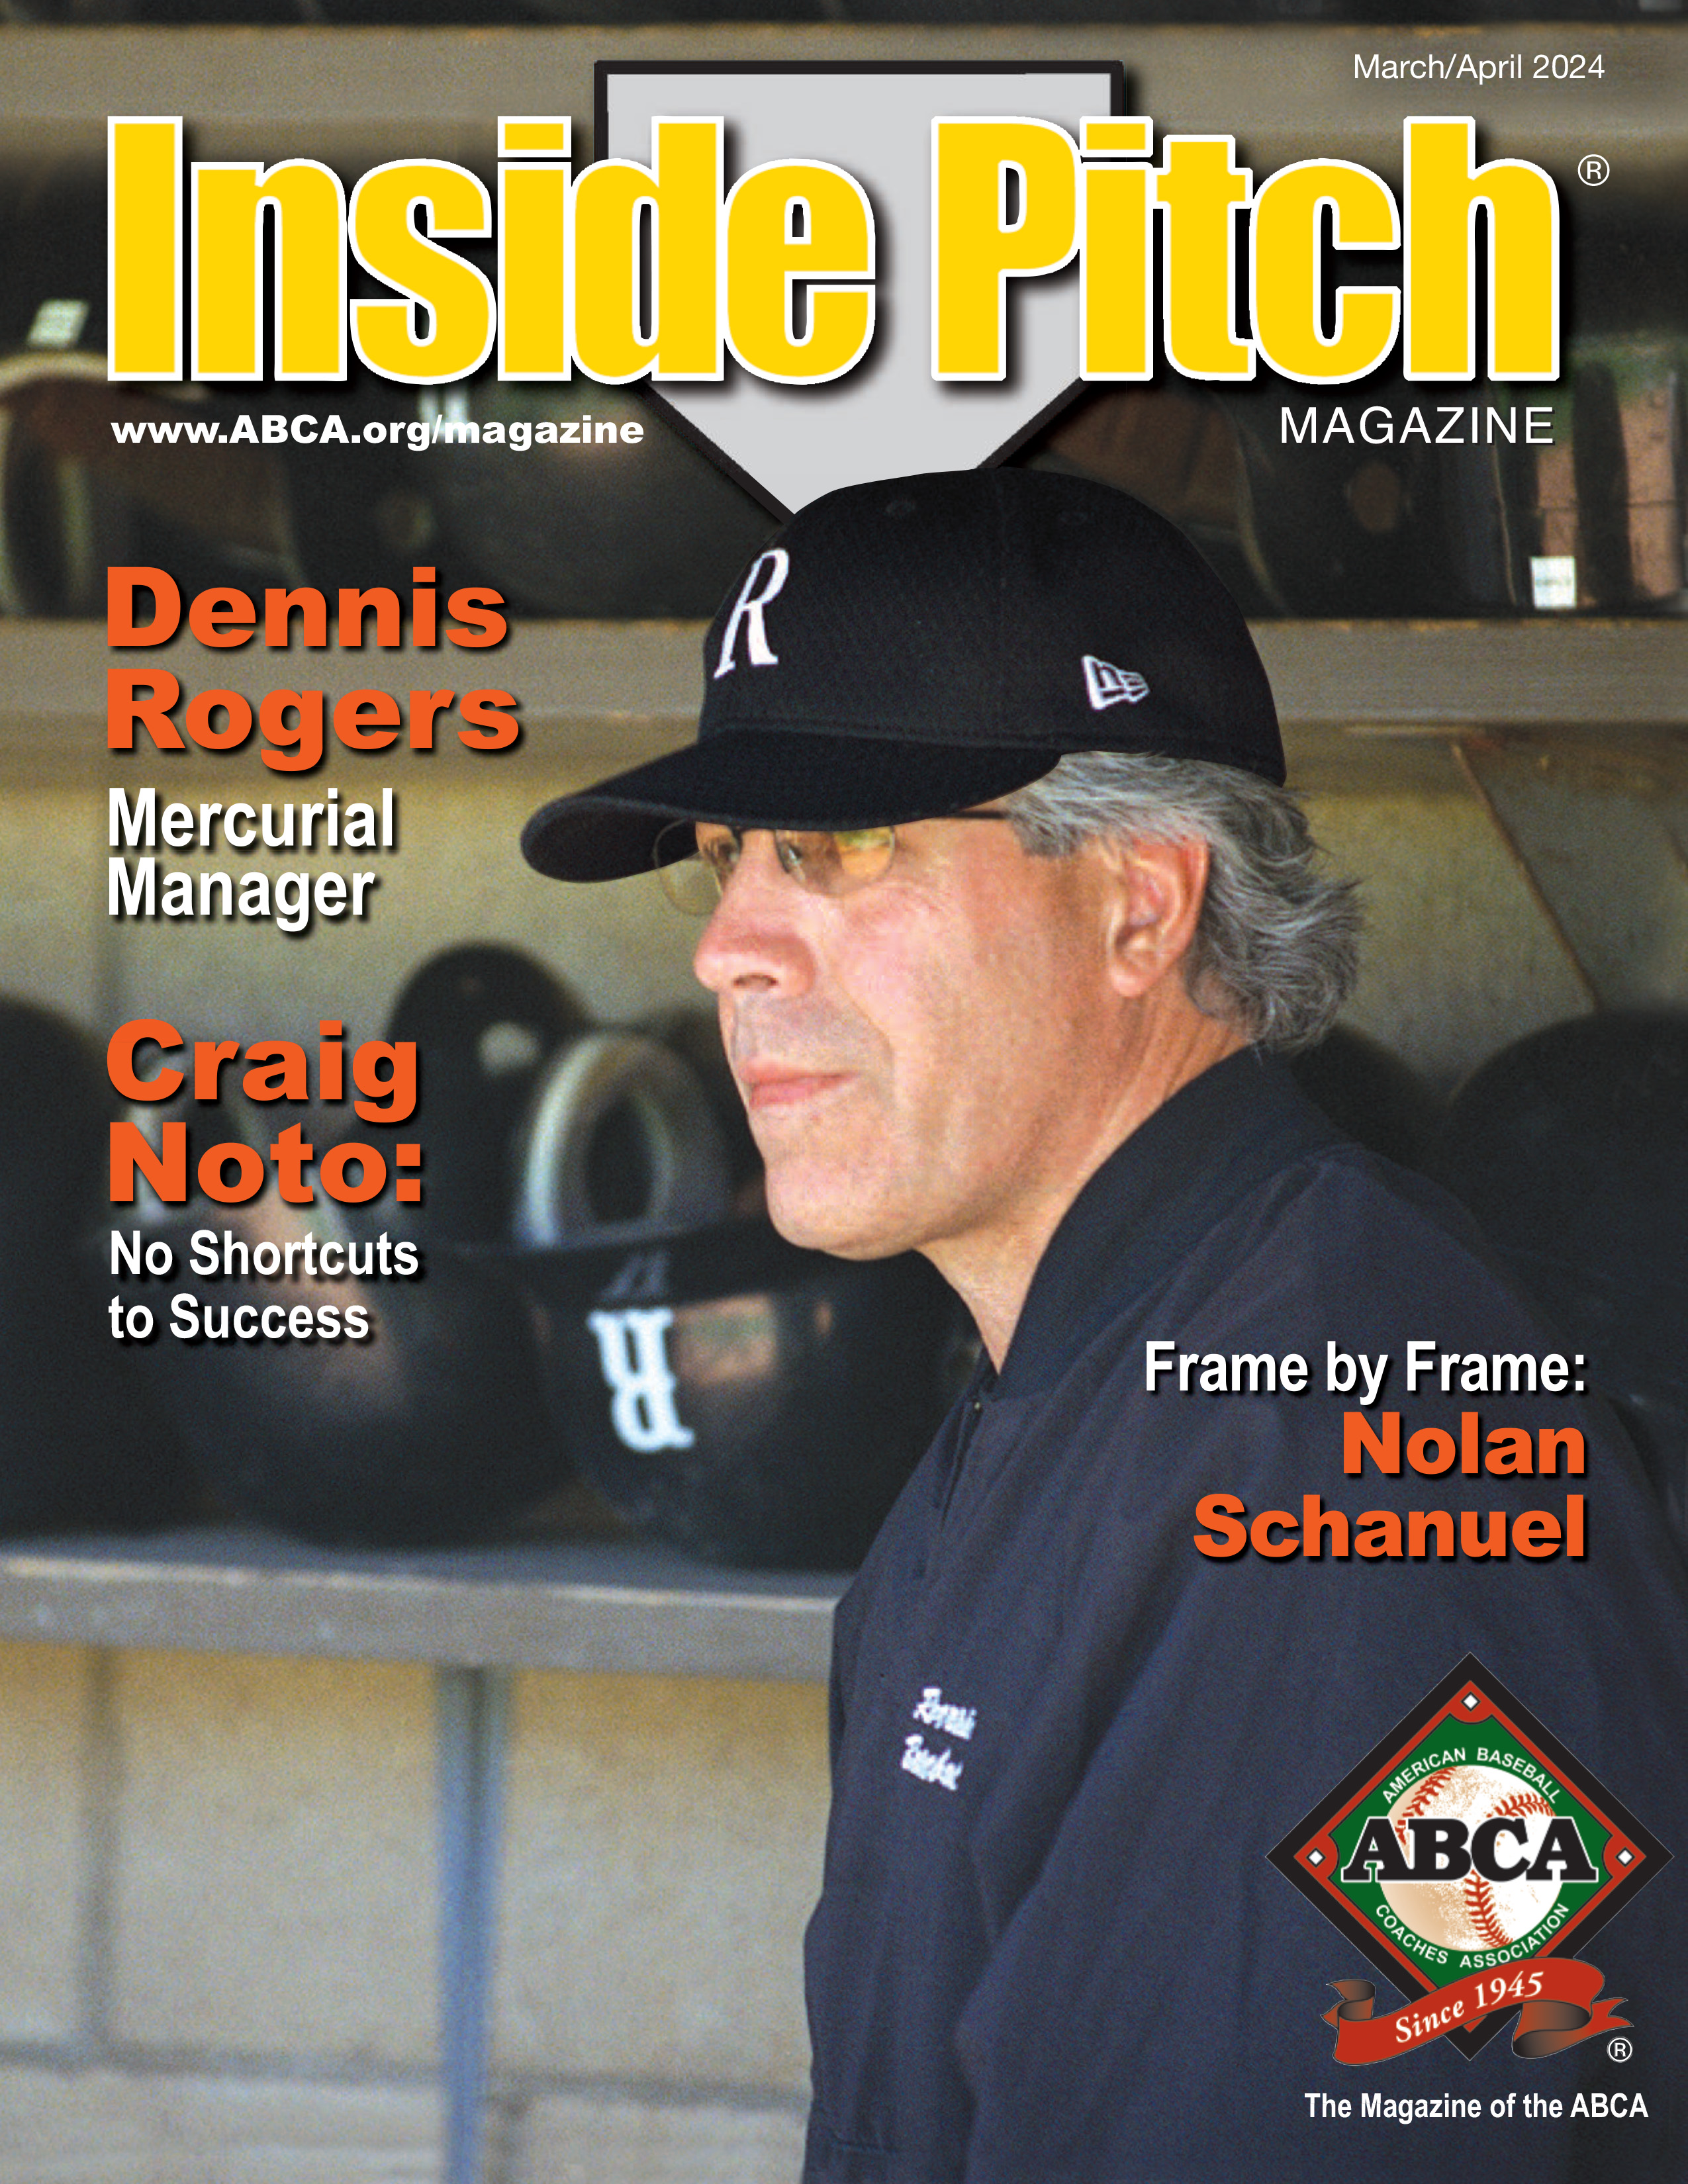 Inside Pitch Magazine Cover with Dennis Rogers